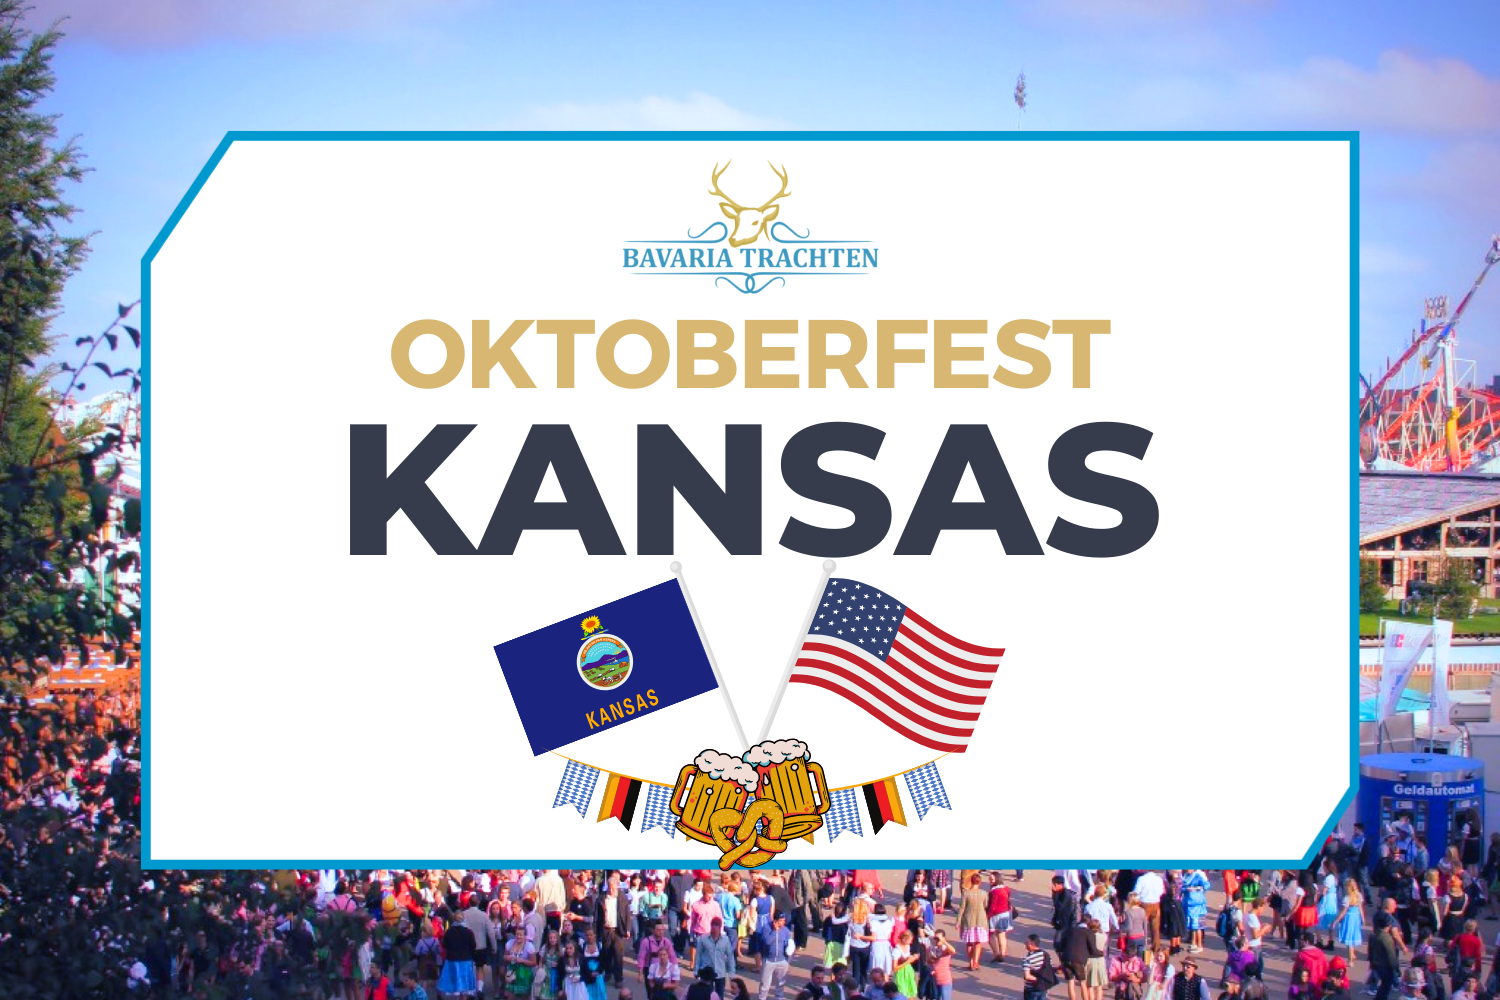 Celebrate Fall with Authentic Oktoberfest Events in Kansas